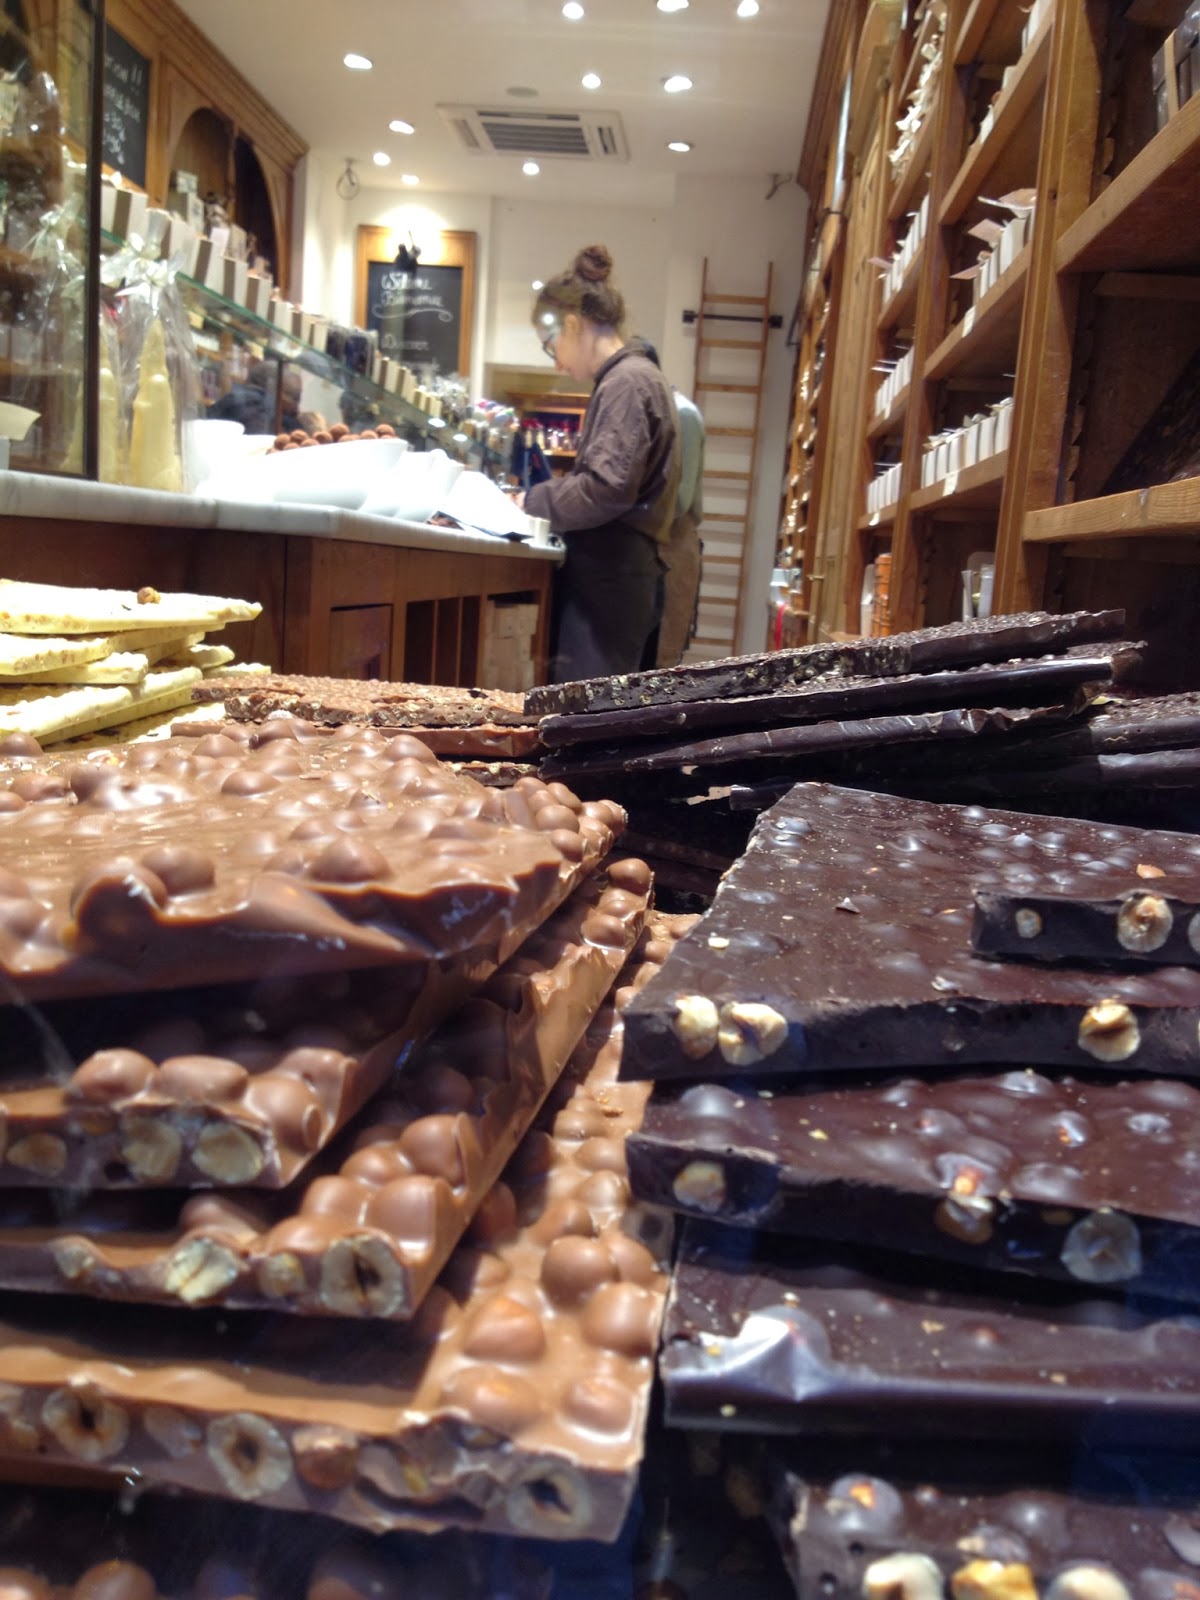 Brussels - Chocolate with hazelnut is sold by weight